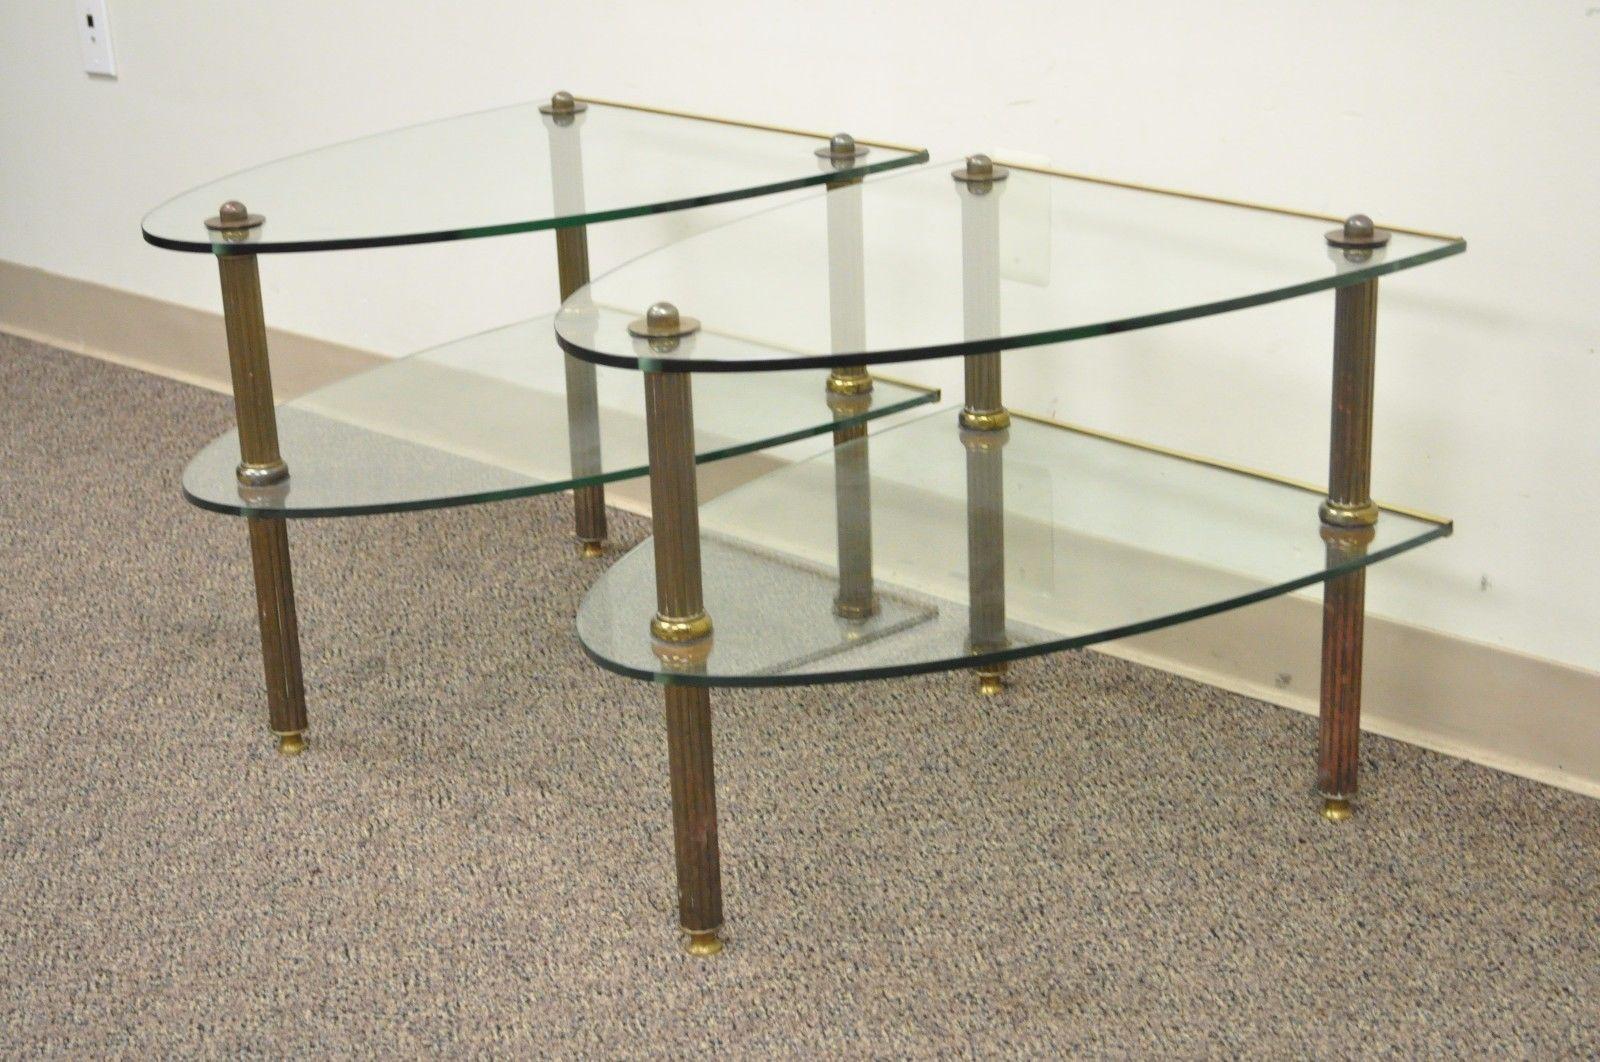 Pair of vintage Hollywood Regency French style brass and glass two-tier side tables after Maison Jansen. Item features two shaped glass tiers, reeded column brass legs, beautiful authentic patina to brass, circa 1950. Measurements: 19